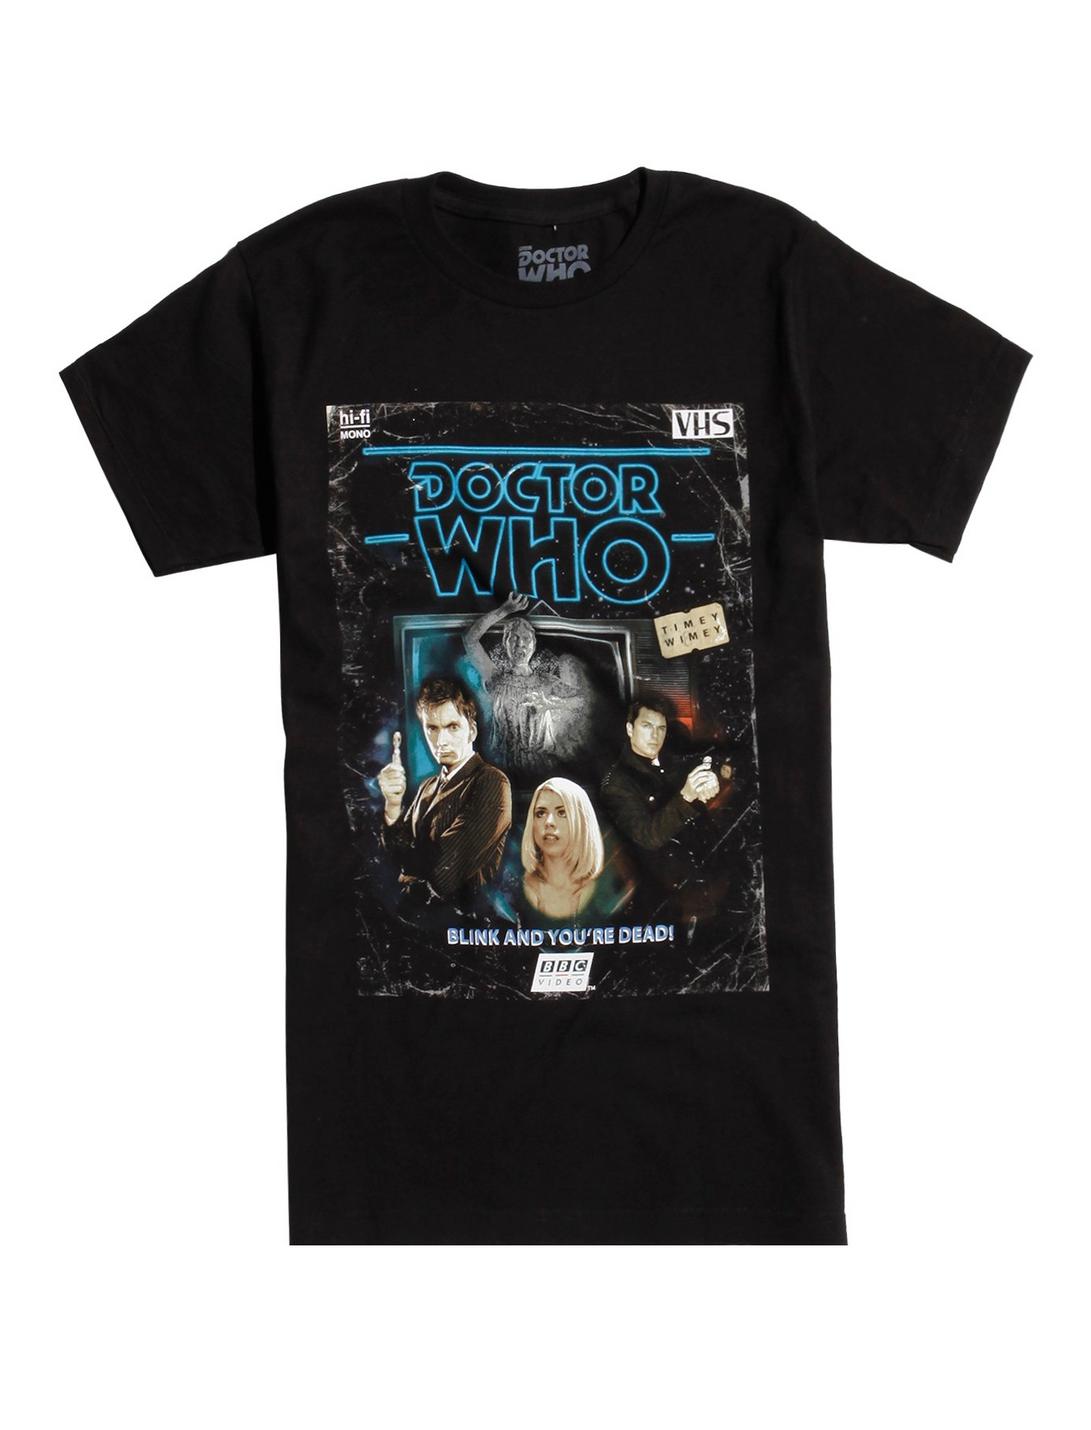 Doctor Who Blink And You're Dead Retro VHS T-Shirt, BLACK, hi-res